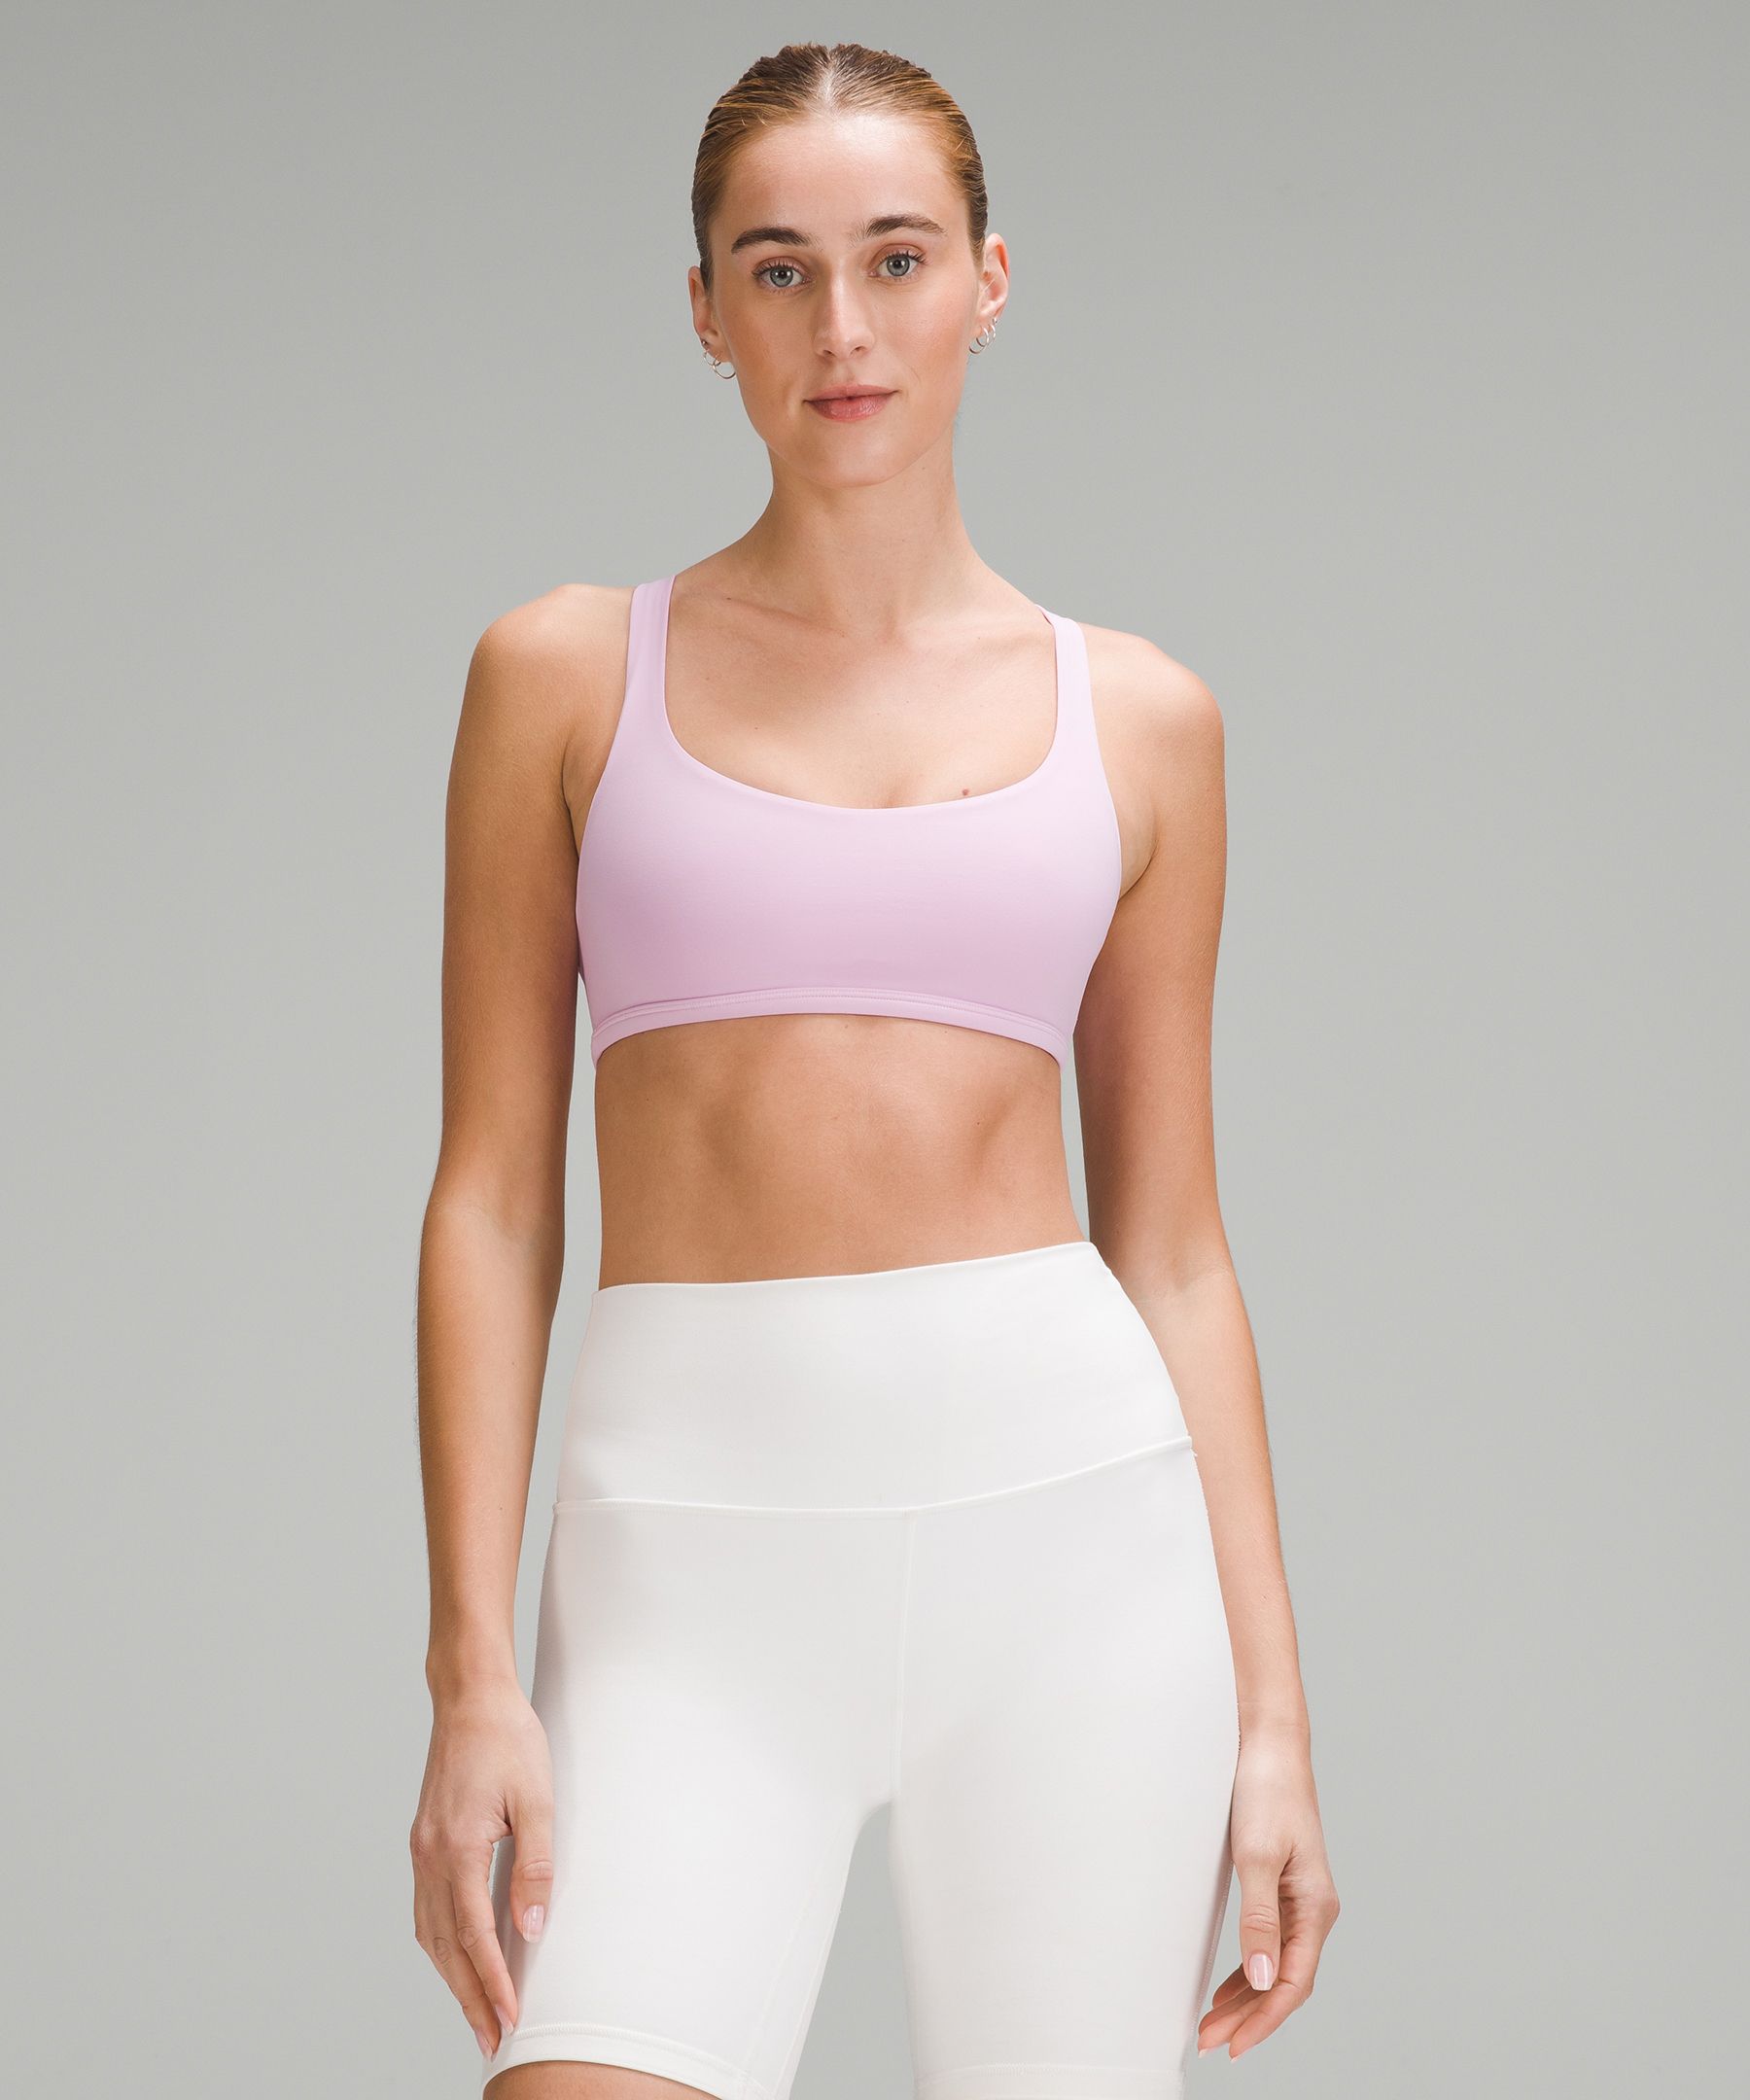 Lululemon Free To Be Bra Long Line ICVE Size 12 (CAN) / 16 (AUS)